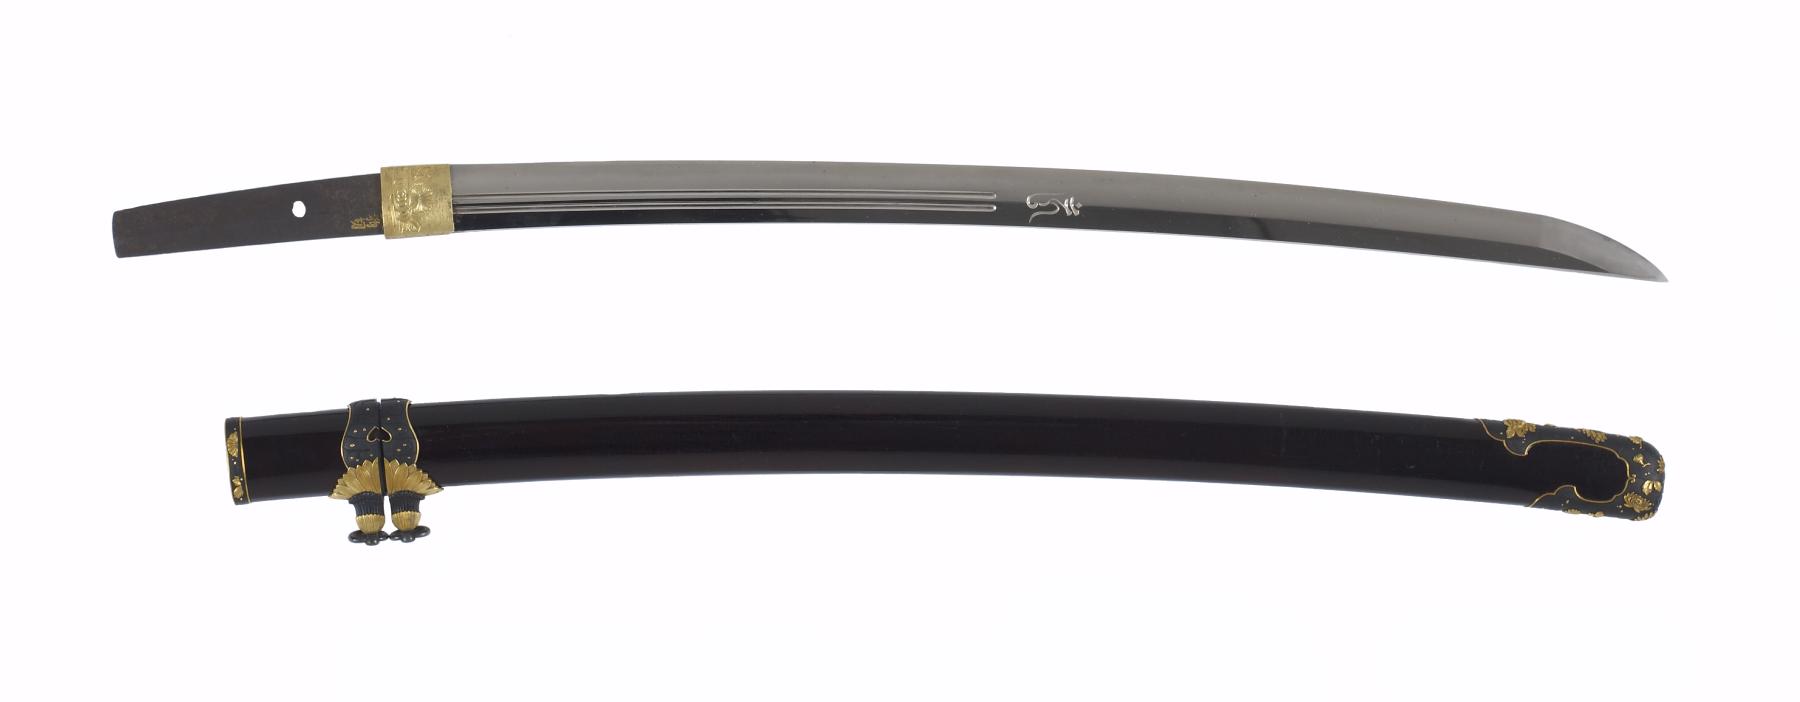 Image for Sword (tachi) with dark brown lacquer saya, tortoise-shell marks (includes 51.1228.1-51.1228.4)